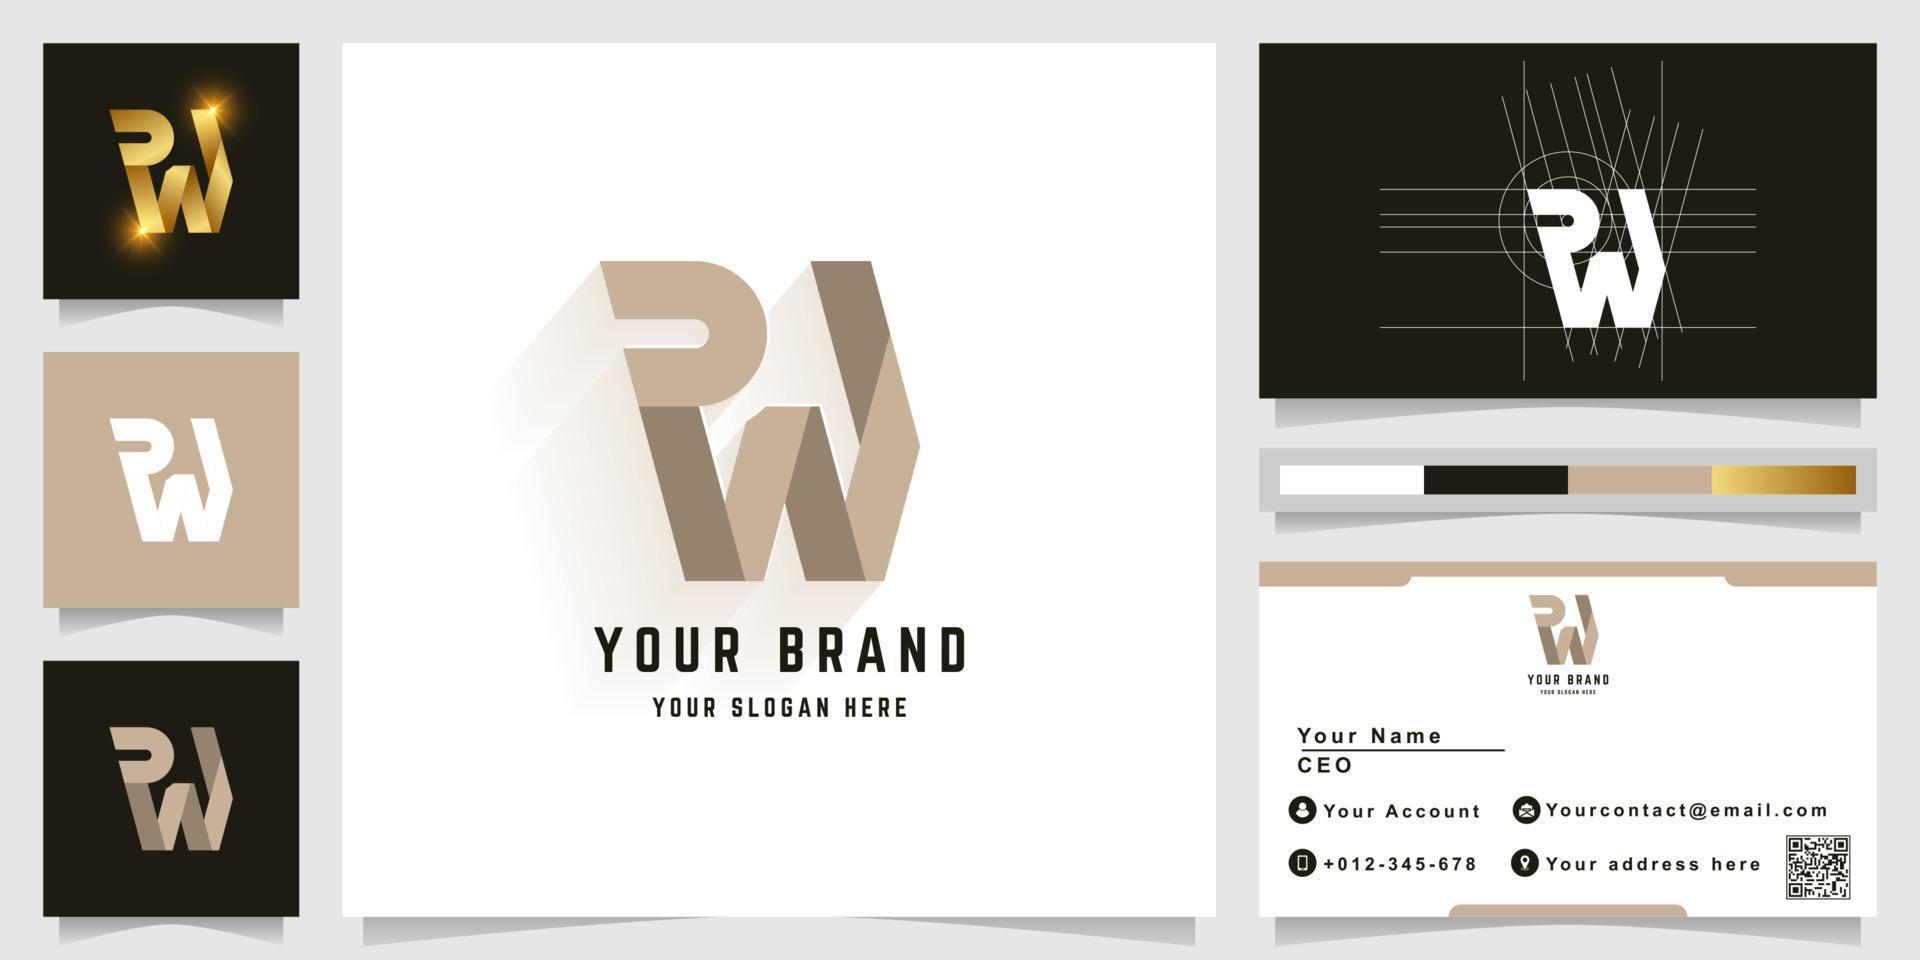 Letter W or PW monogram logo with business card design vector